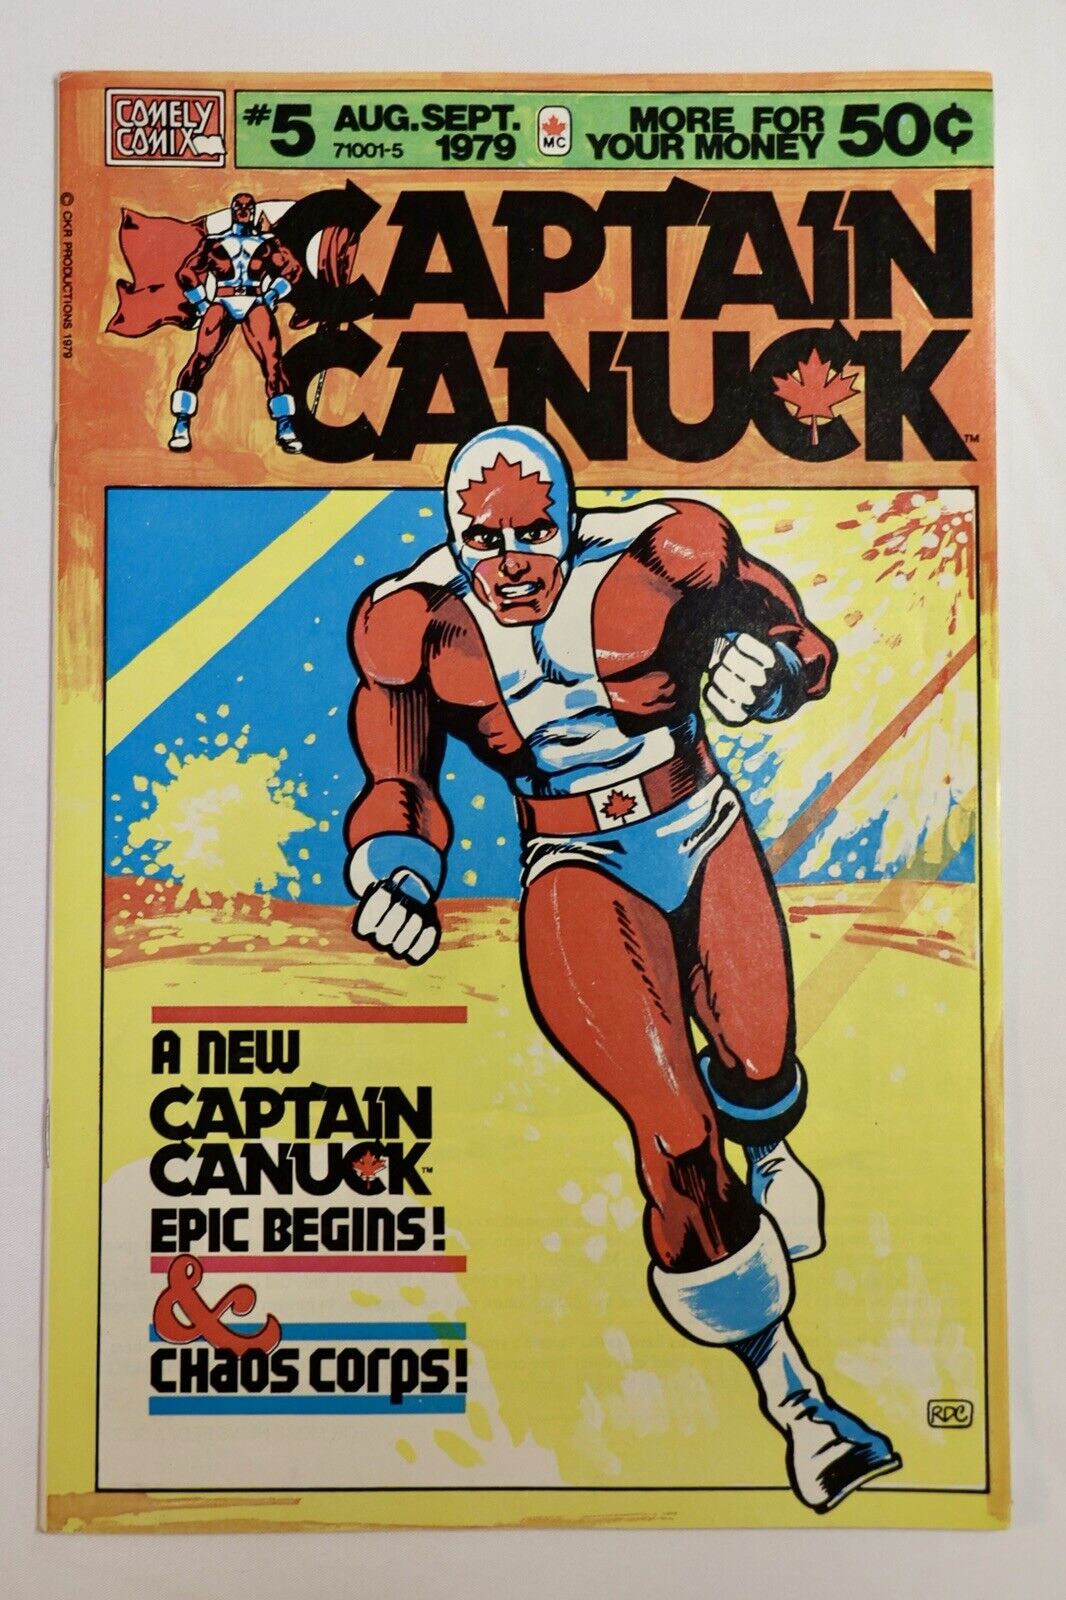 CAPTAIN CANUCK #5 (1979) Chaos Corps - Planet Earth Patrol - COMELY COMIX